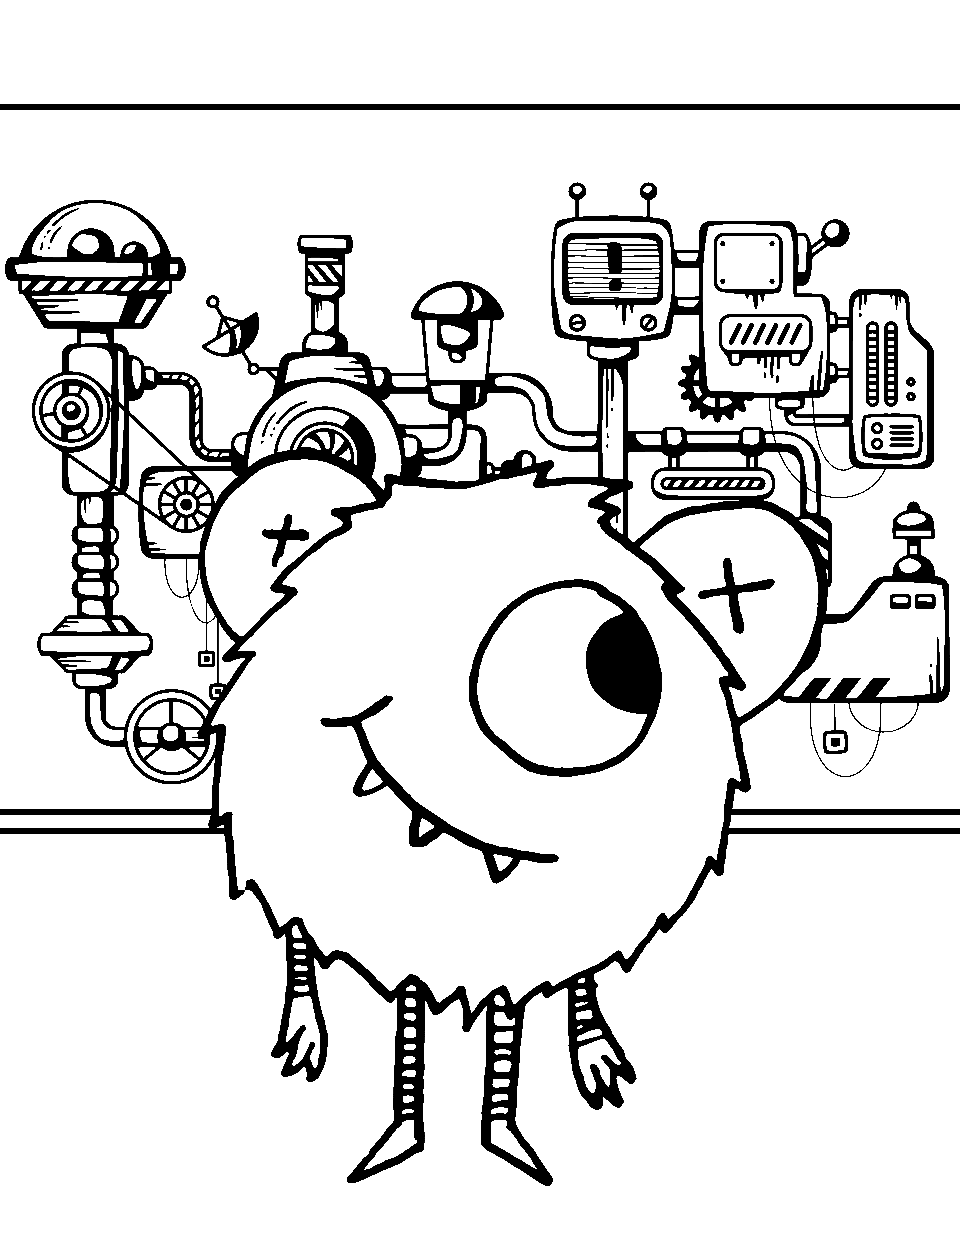 Monster at a Science Fair Coloring Page - A smart monster presenting a science project at a fair.